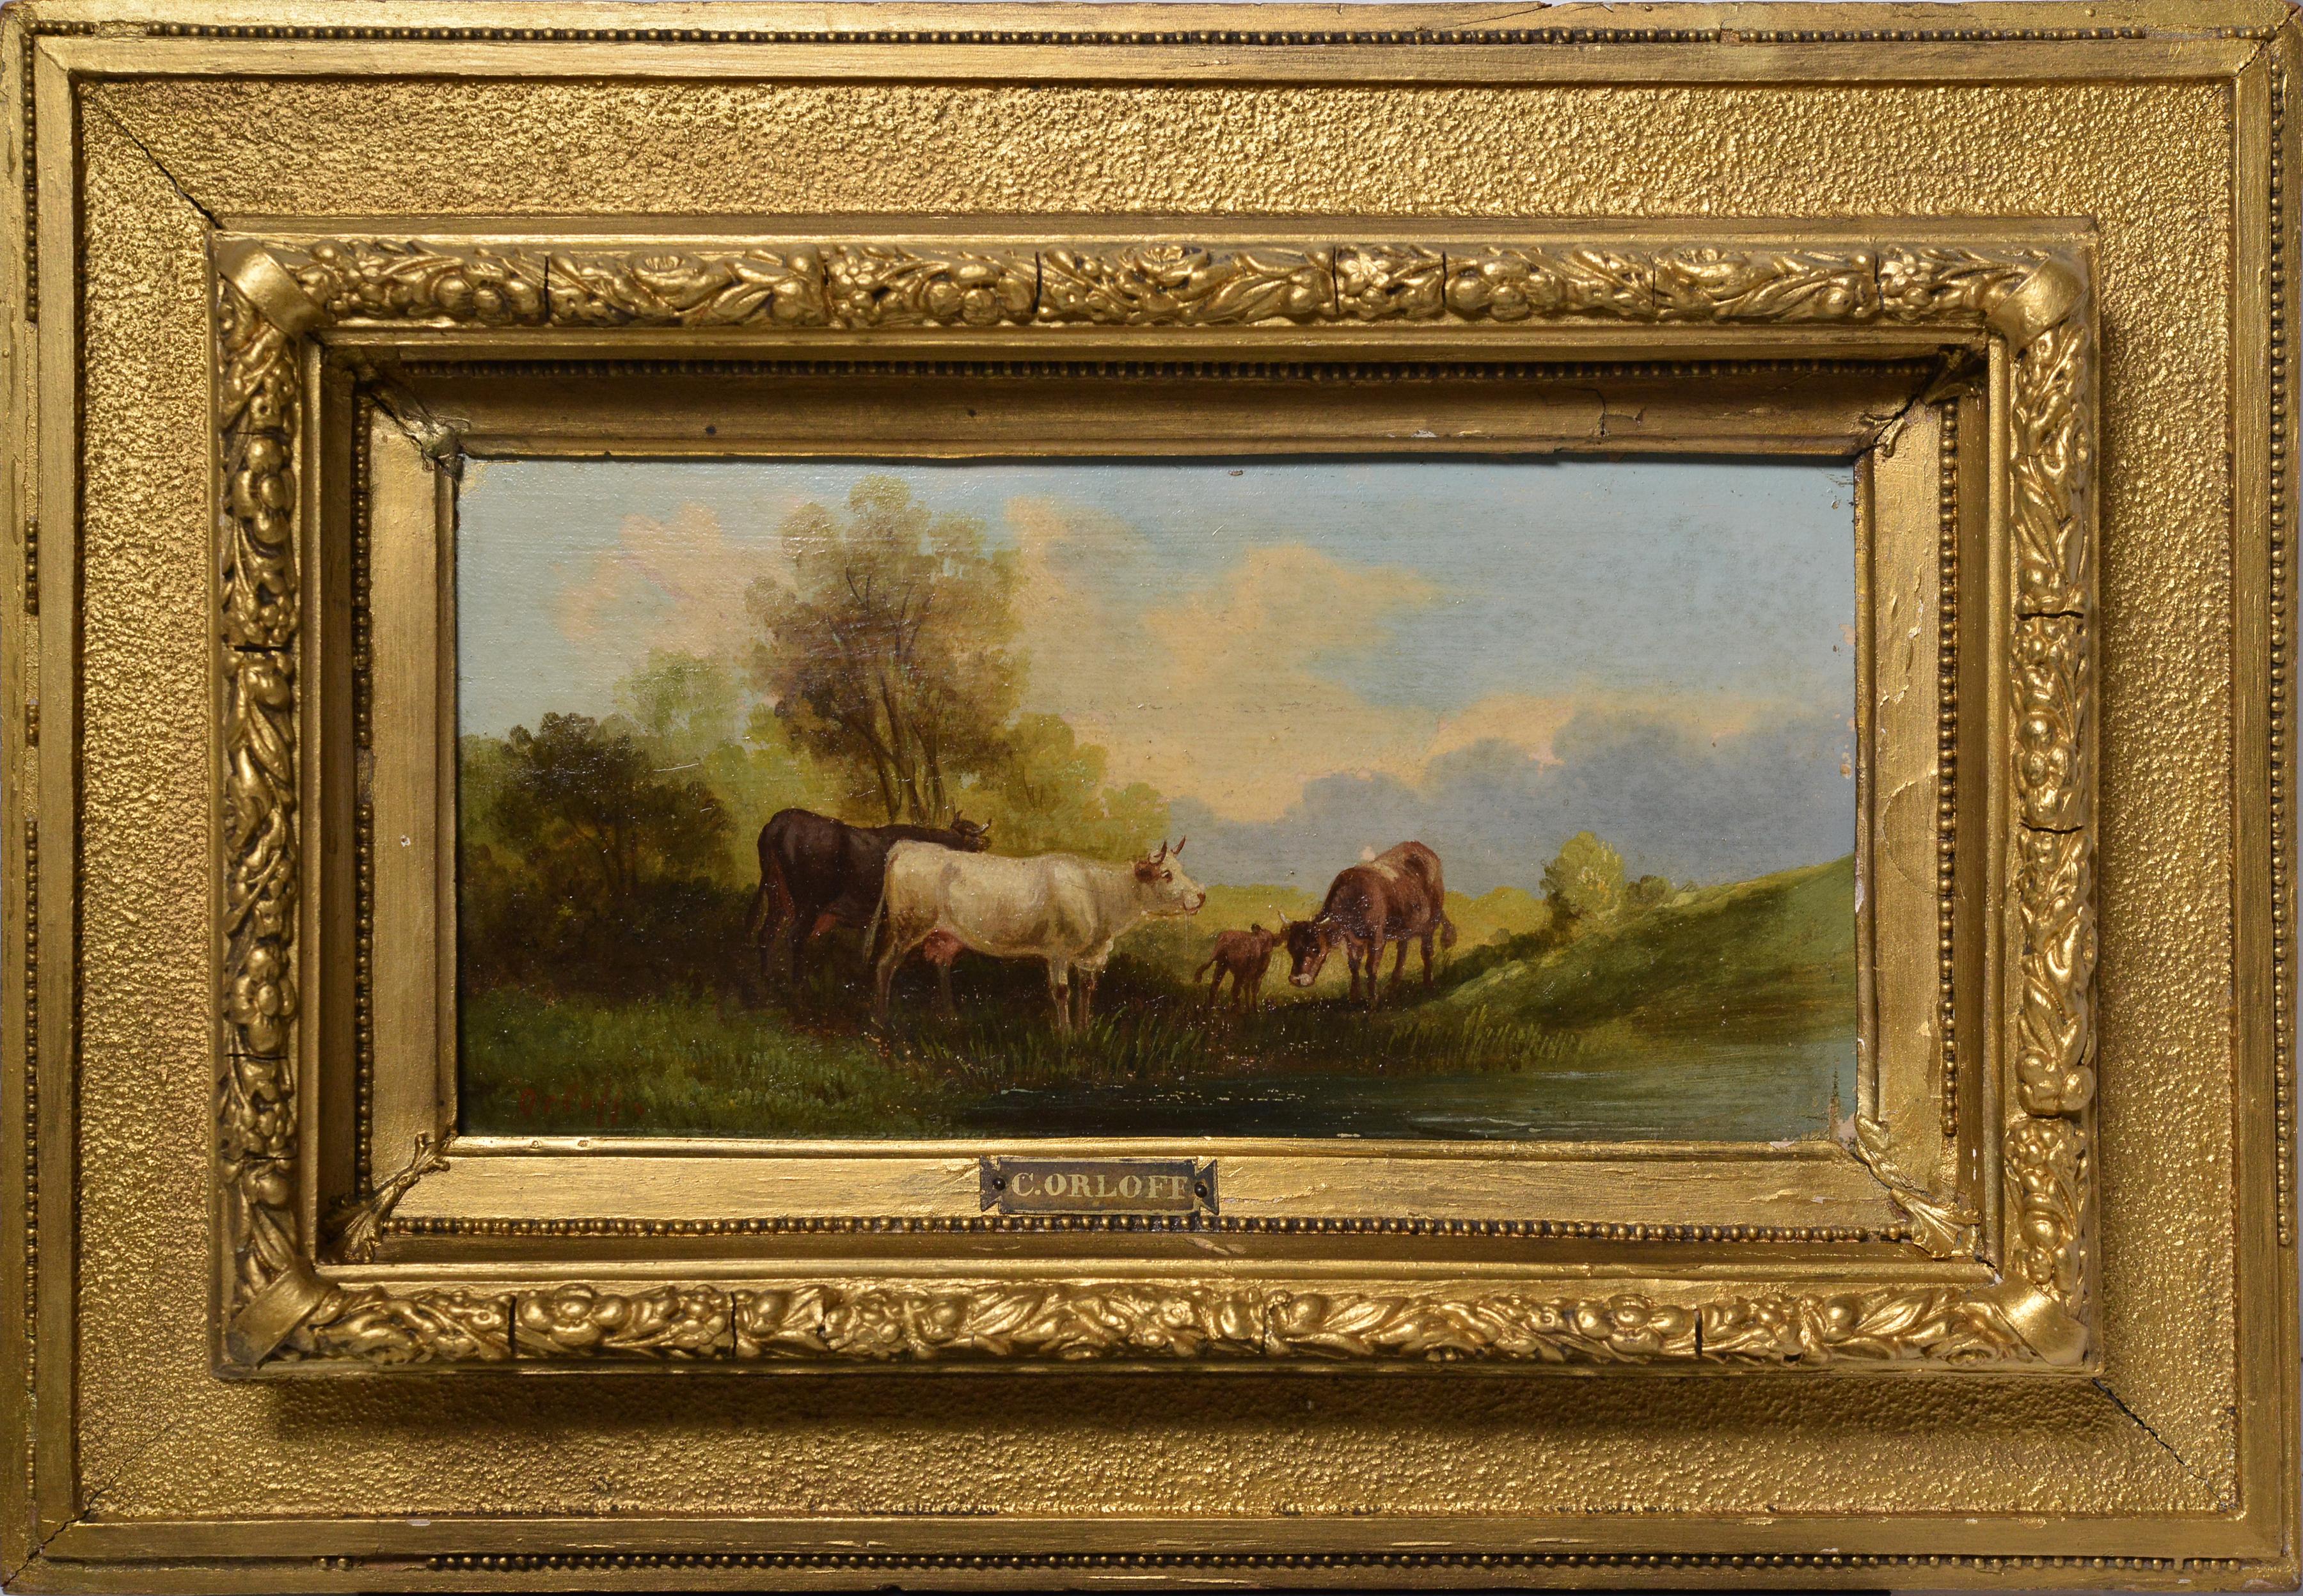 Jwan Petowitsch Orloff Animal Painting - Pastoral Landscape w Cattle Cows 19th century Oil Painting by Russian Master